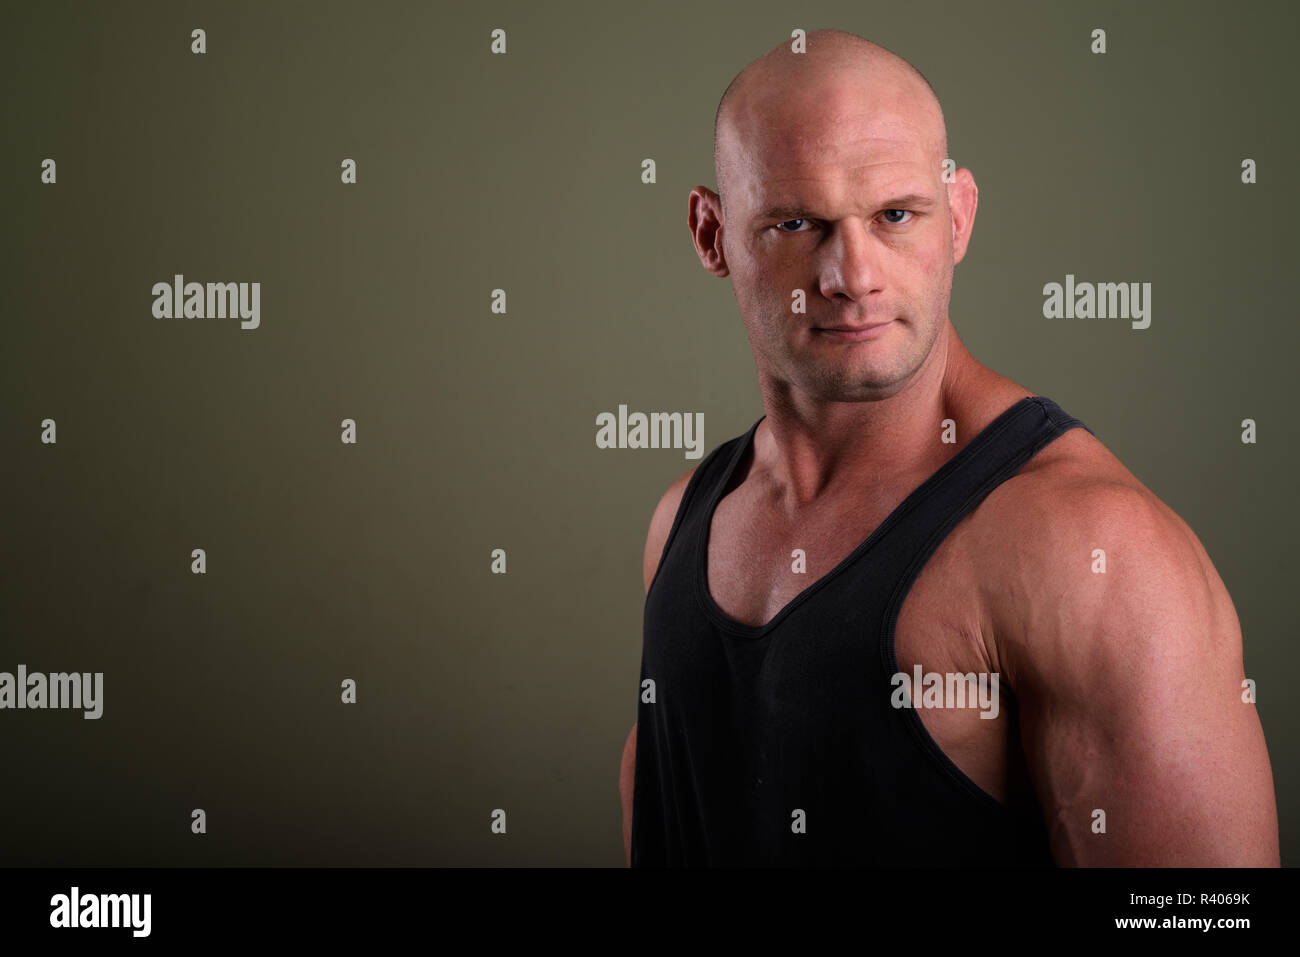 Bald muscular man wearing tank top against colored background  Stock Photo